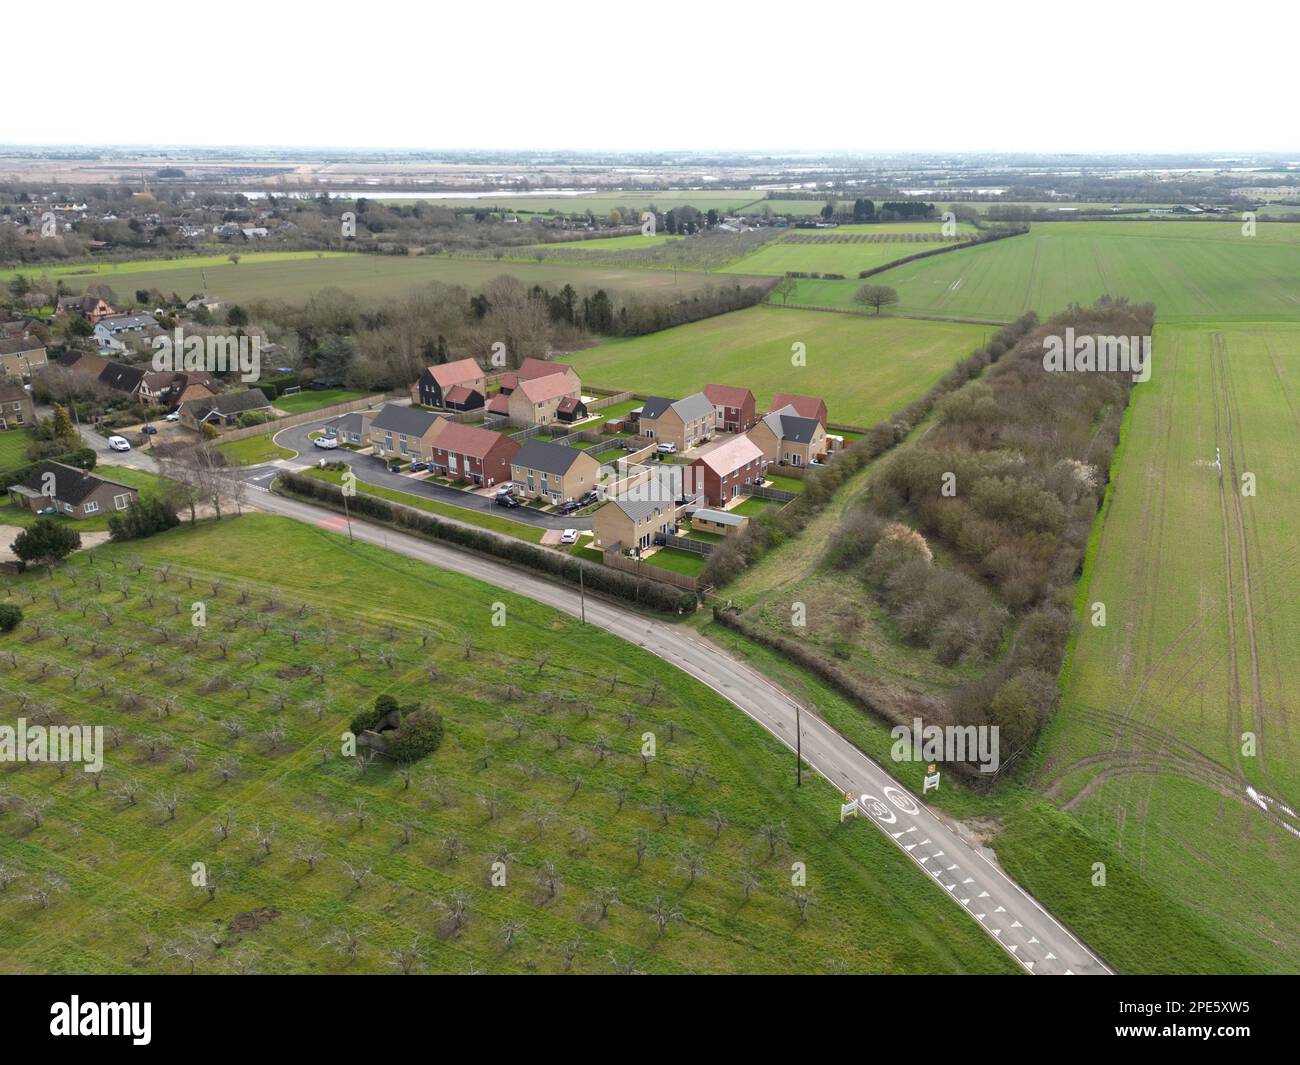 Aerial view of a new social and private housing development at the edge of an East Anglian village. Stock Photo